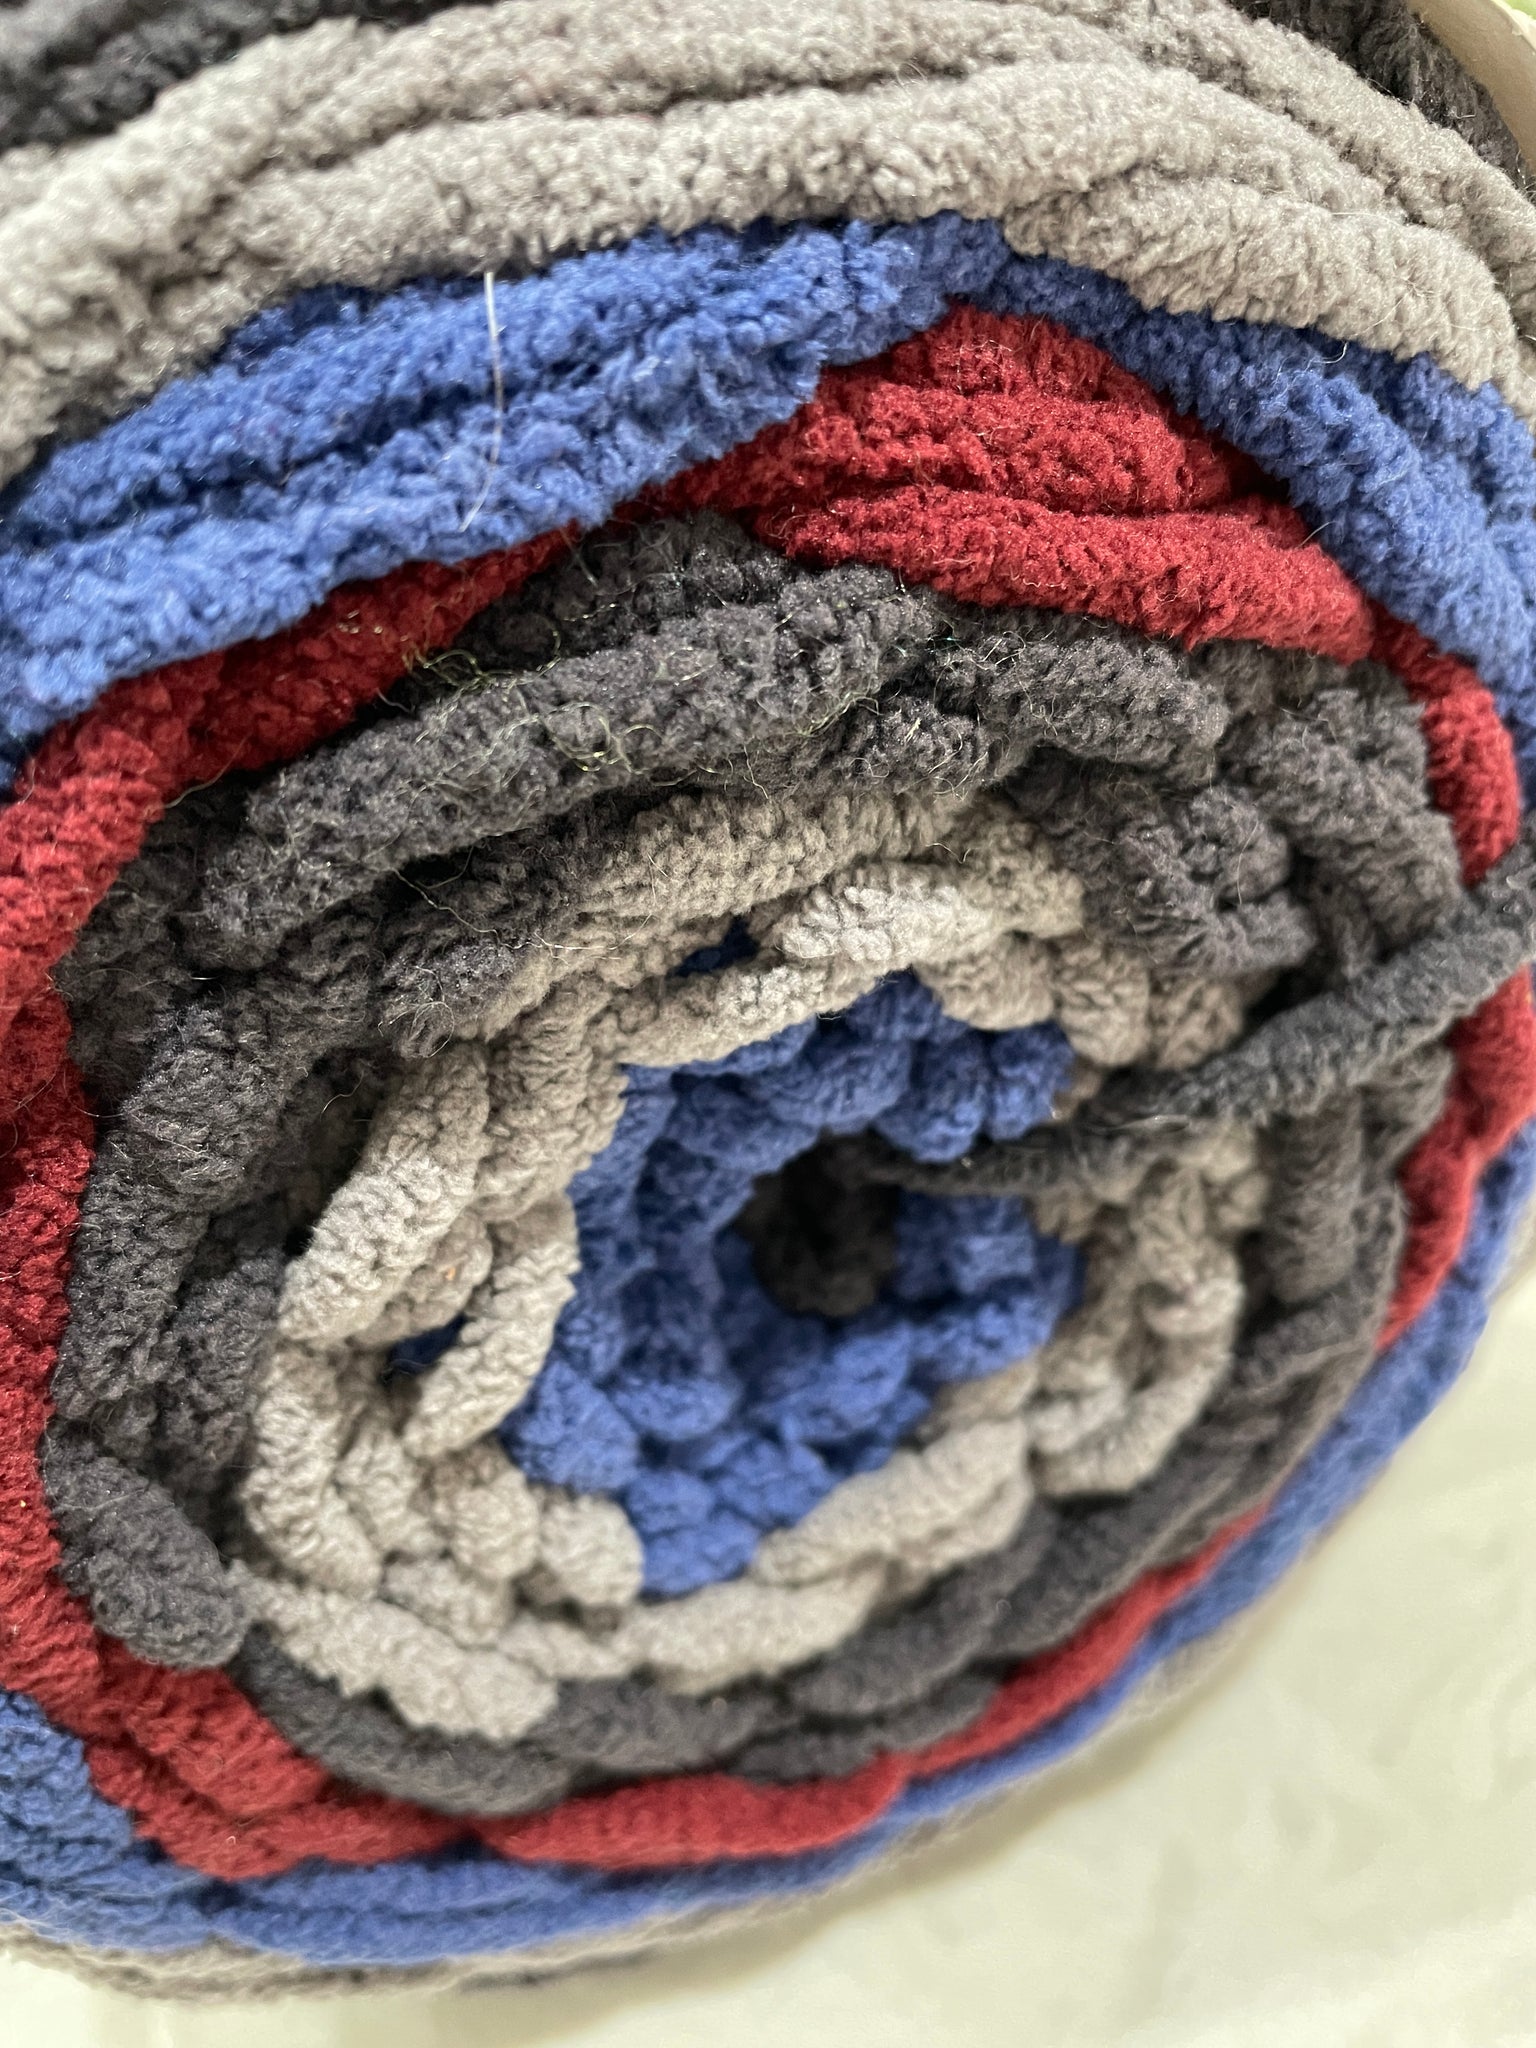 Yarn Polyester Blanket Weight - Variegated Red, Blue, Gray and Charcoal